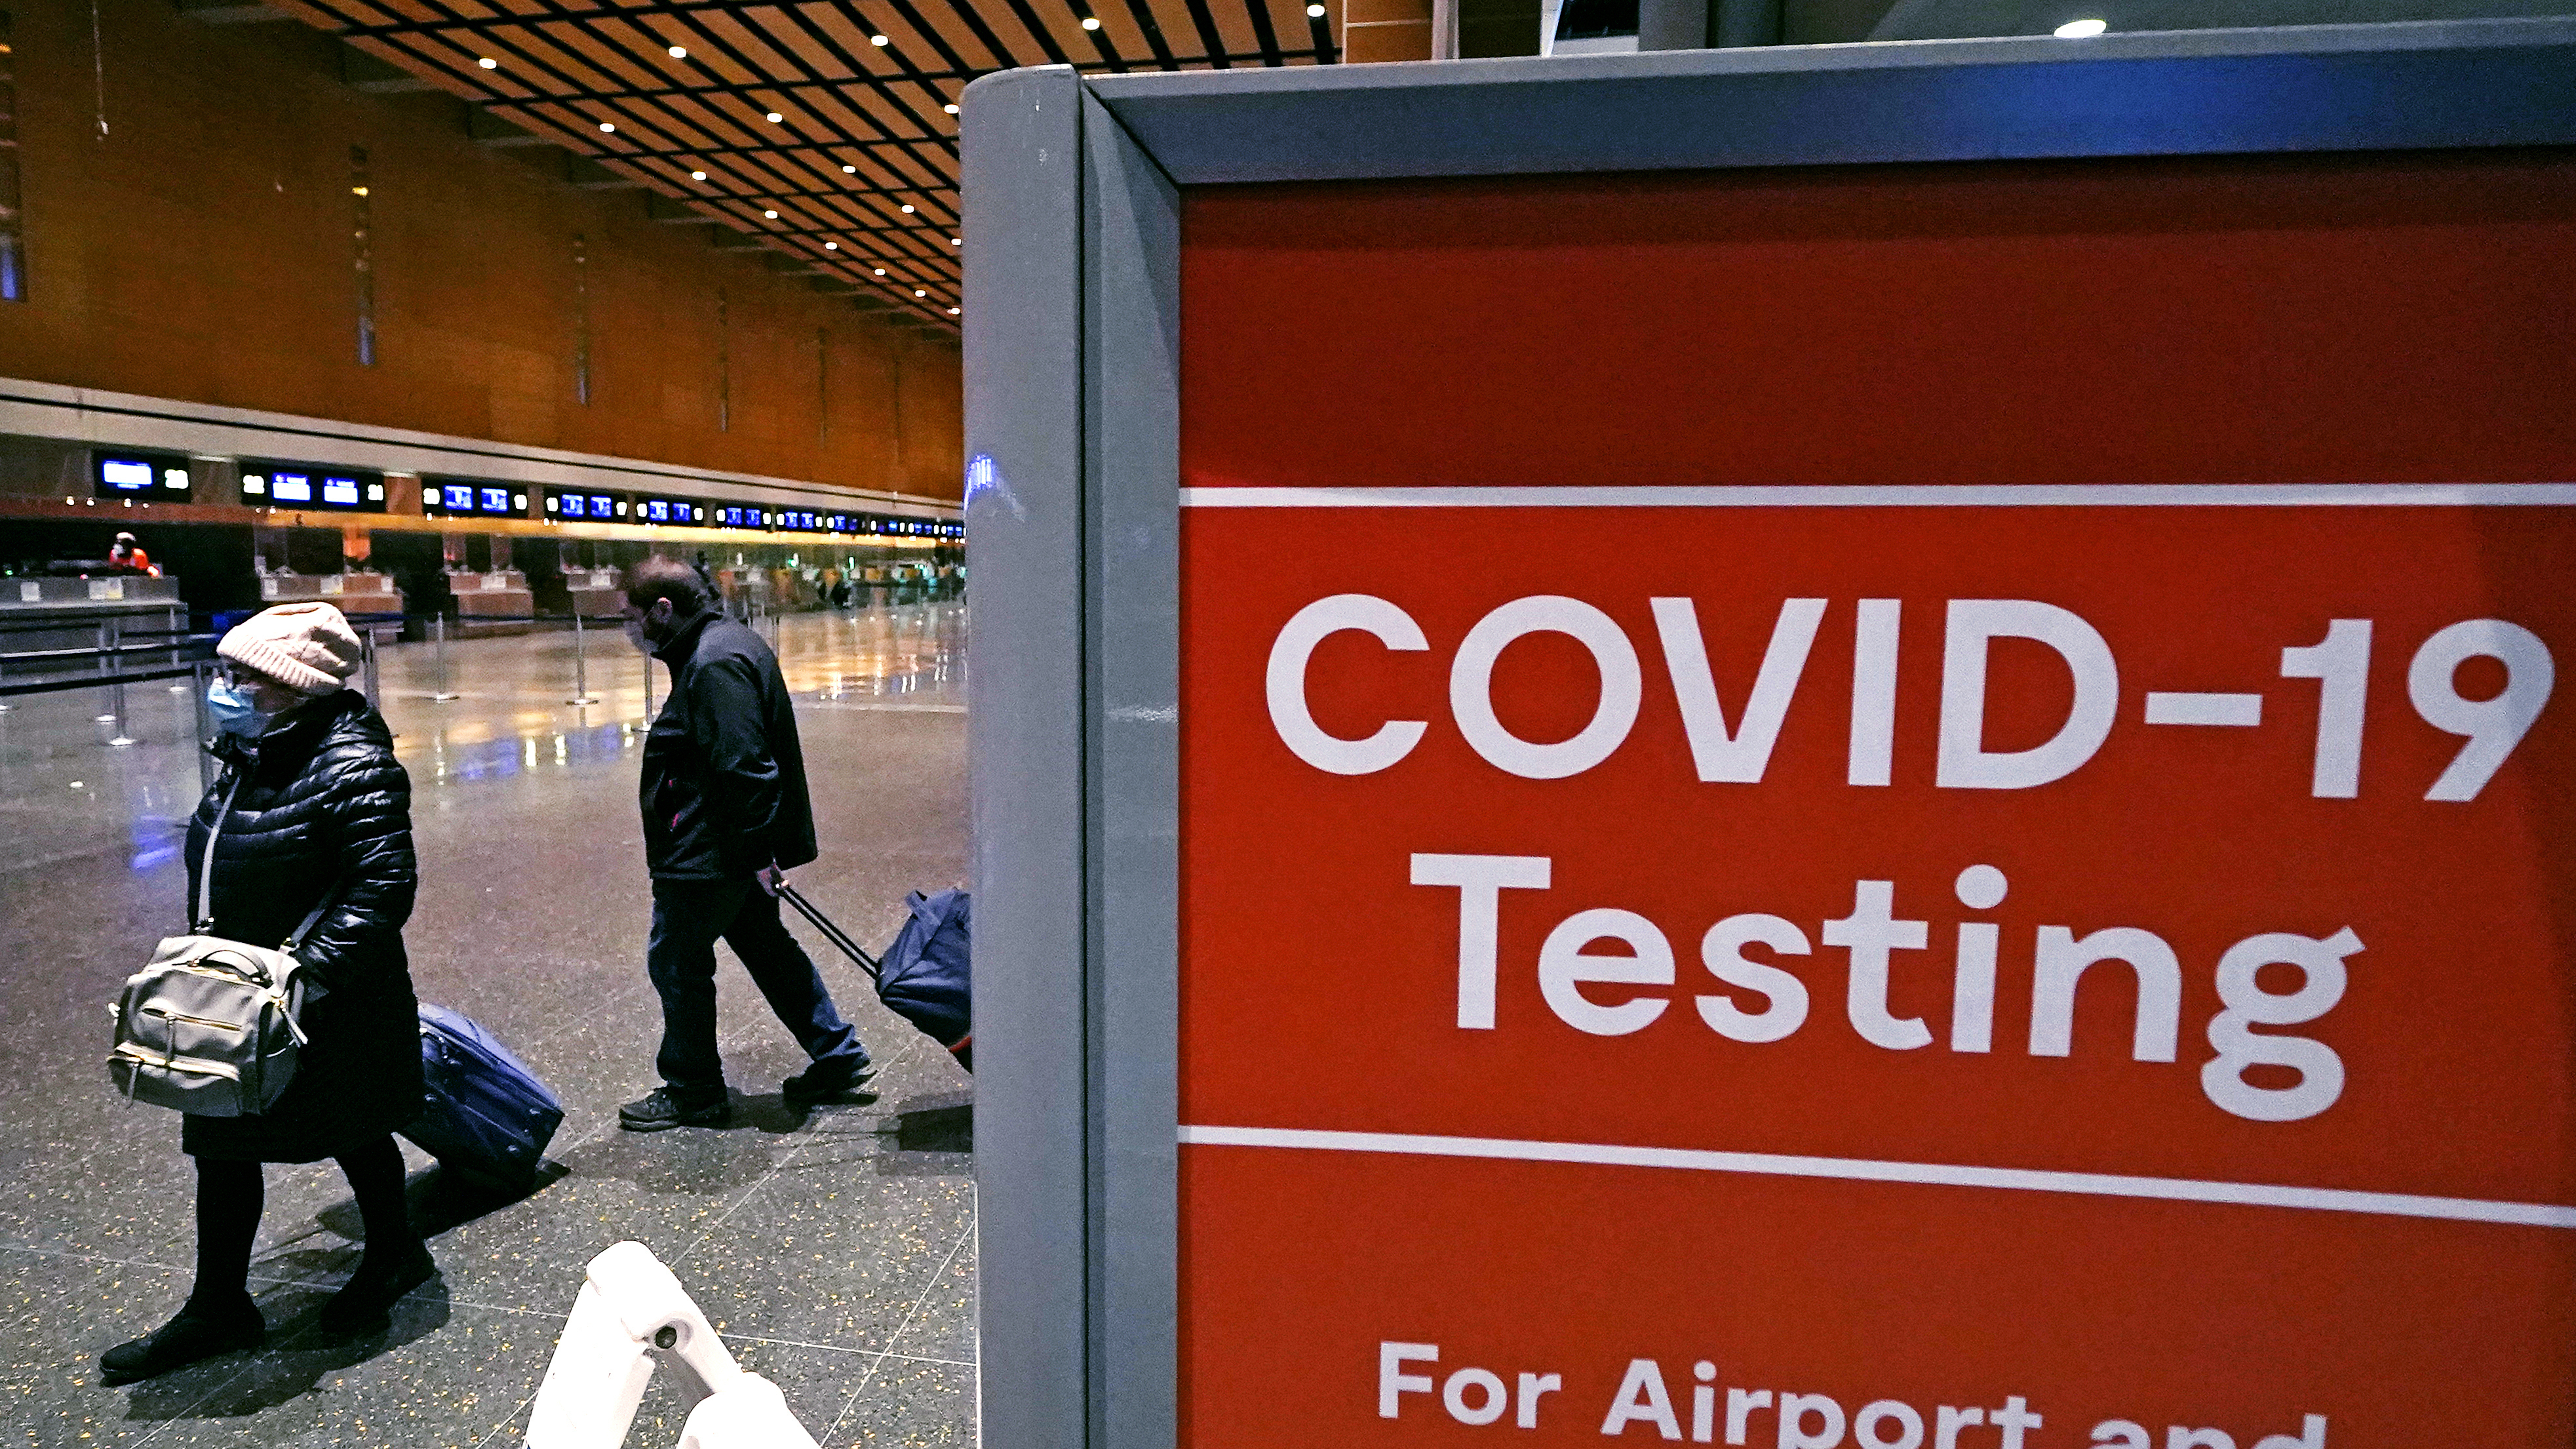 FILE - Travellers pass a sign near a COVID-19 testing site in Terminal E at Logan Airport, on Dec. 21, 2021, in Boston .The Biden administration is lifting its requirement that international air travellers to the U.S. take a COVID-19 test within a day before boarding their flights, easing one of the last remaining government mandates meant to contain the spread of the coronavirus.  (AP Photo/Charles Krupa, File)